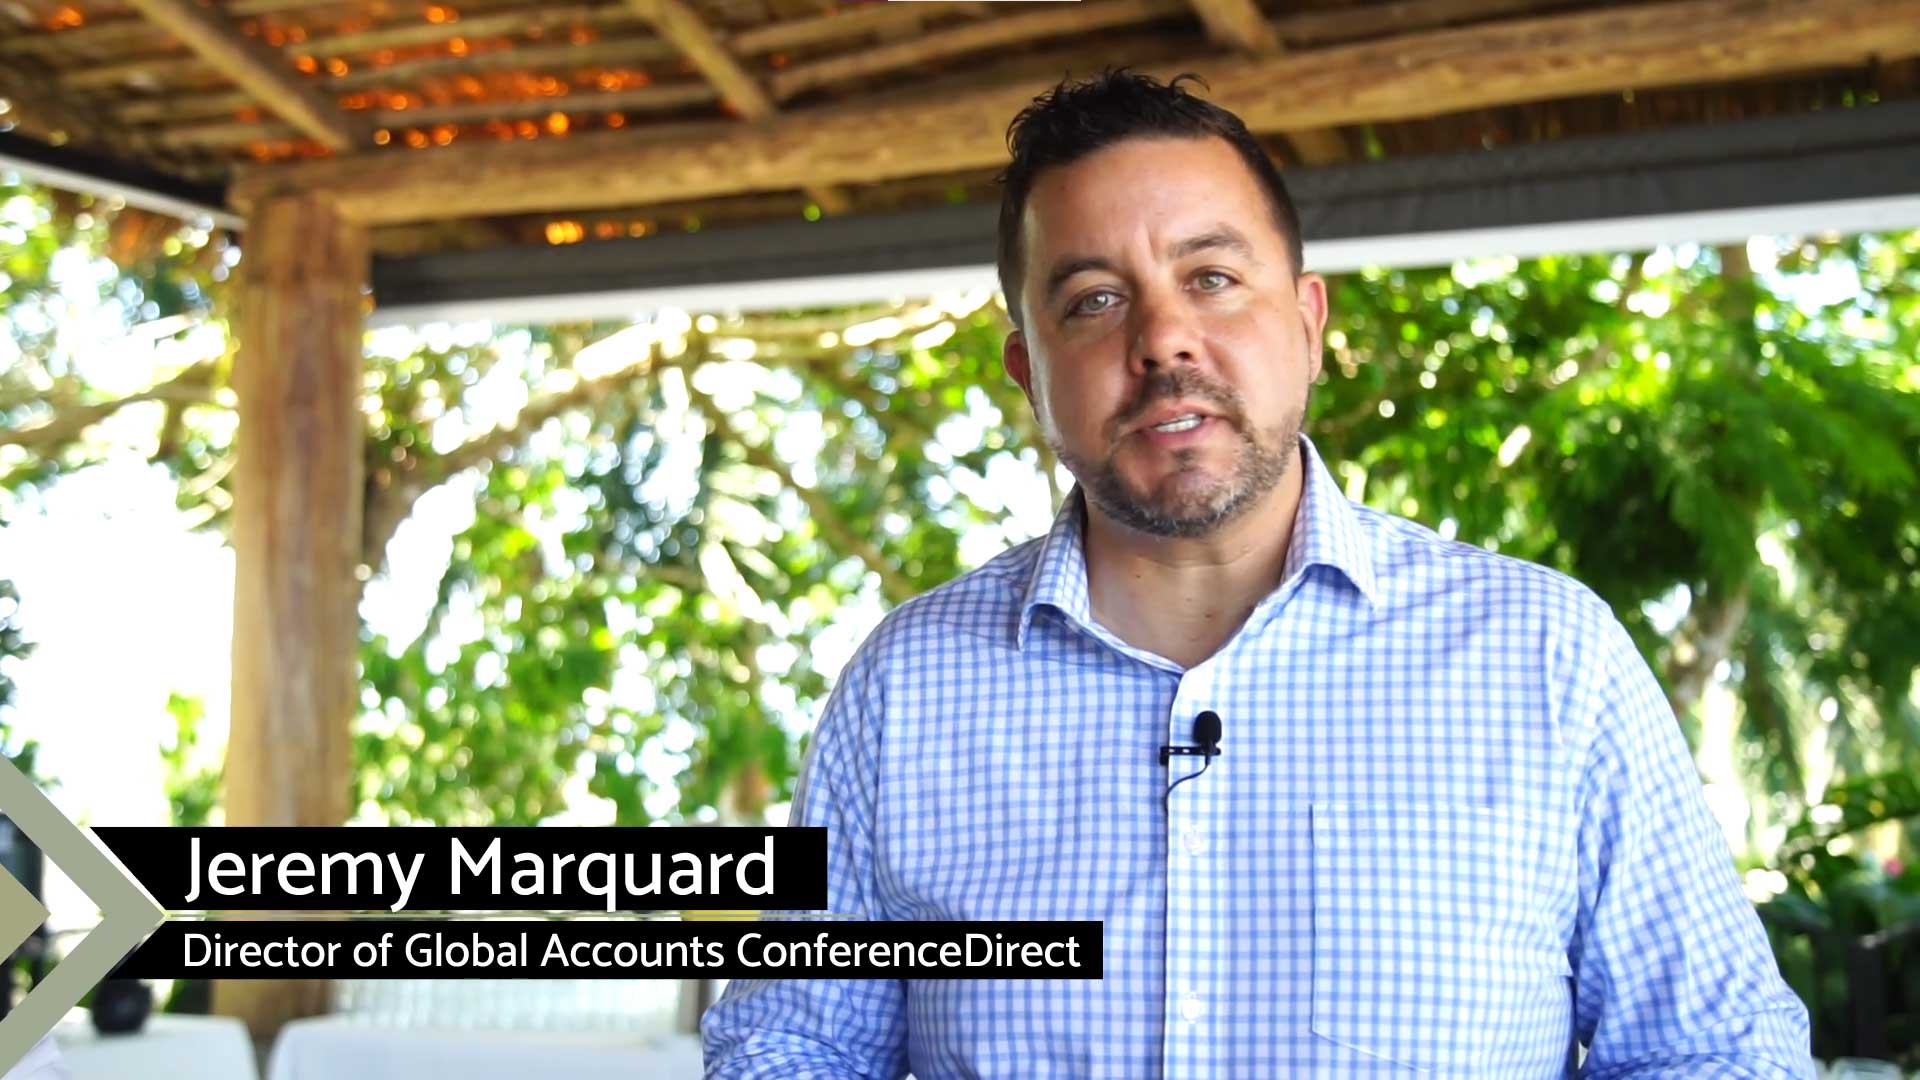 Jeremy Marquard - Director of Global Accounts Conference Direct